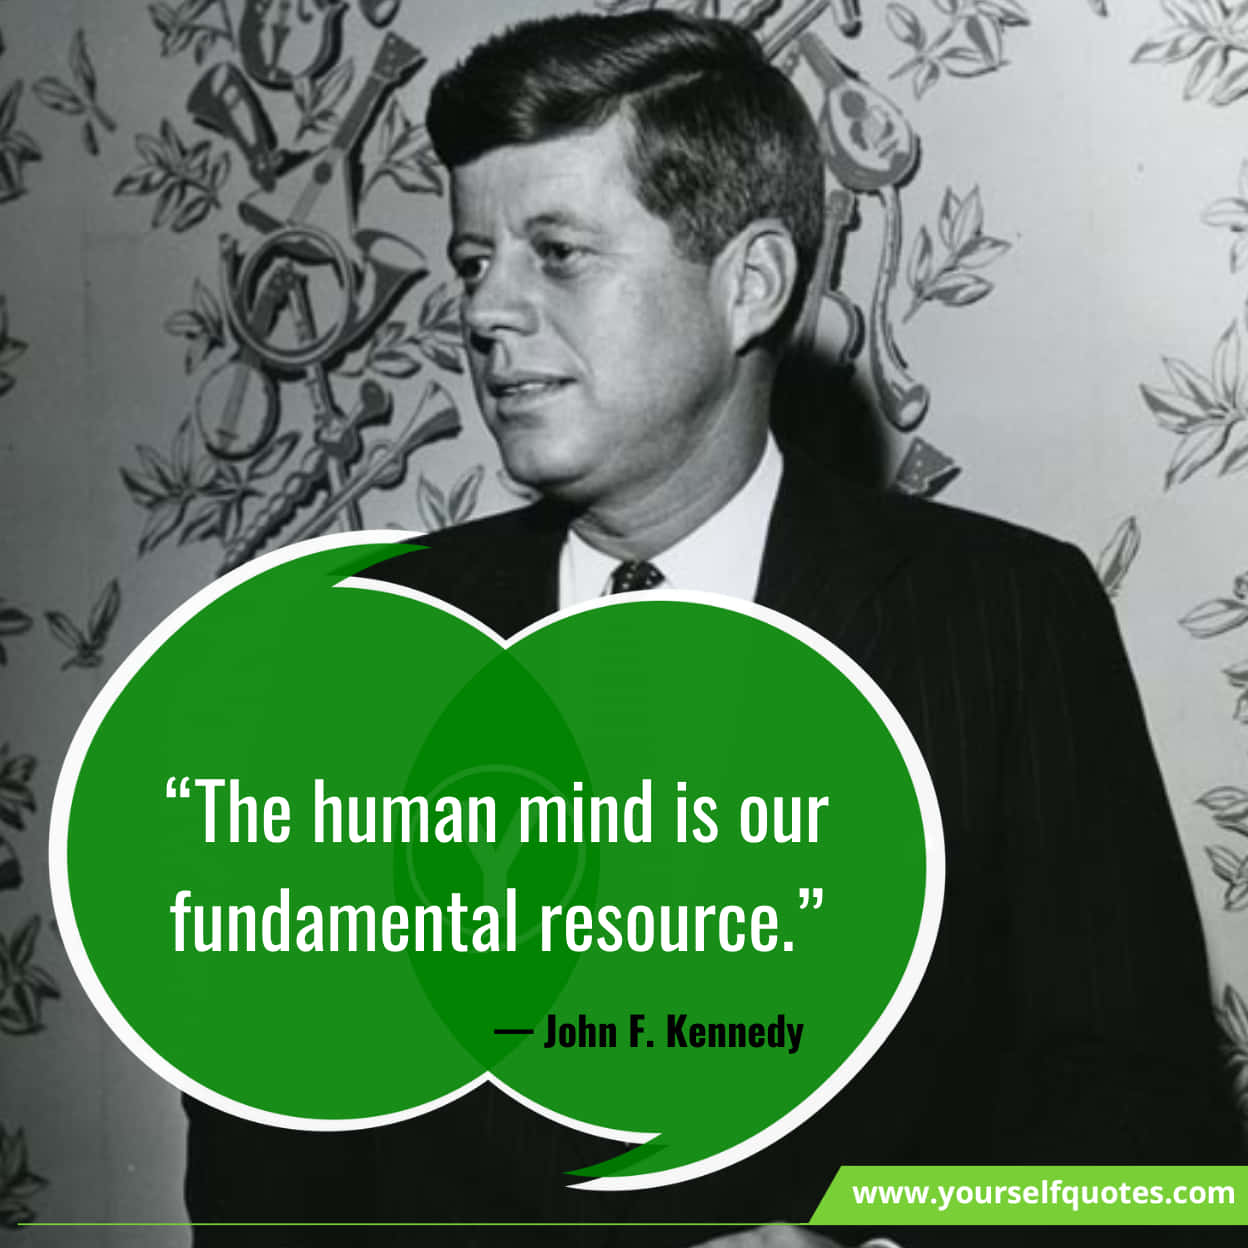 John F Kennedy Quotes On Democracy & Courage